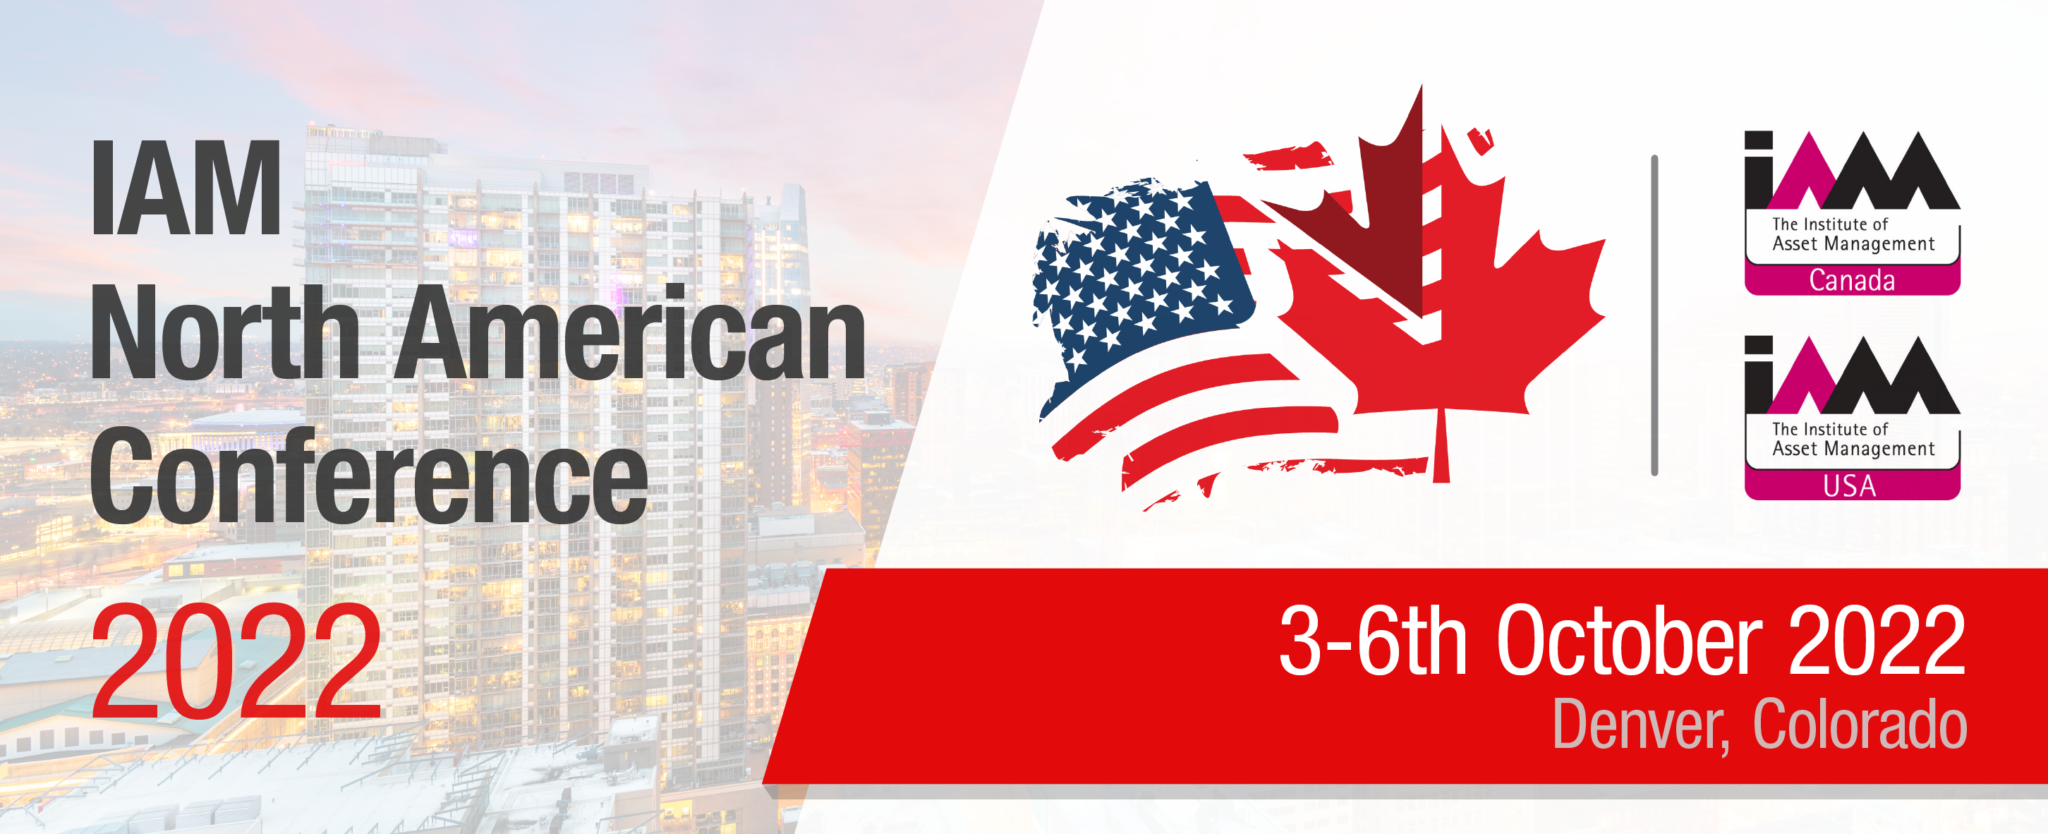 AMCL contributing to the 2022 IAM North American Conference AMCL